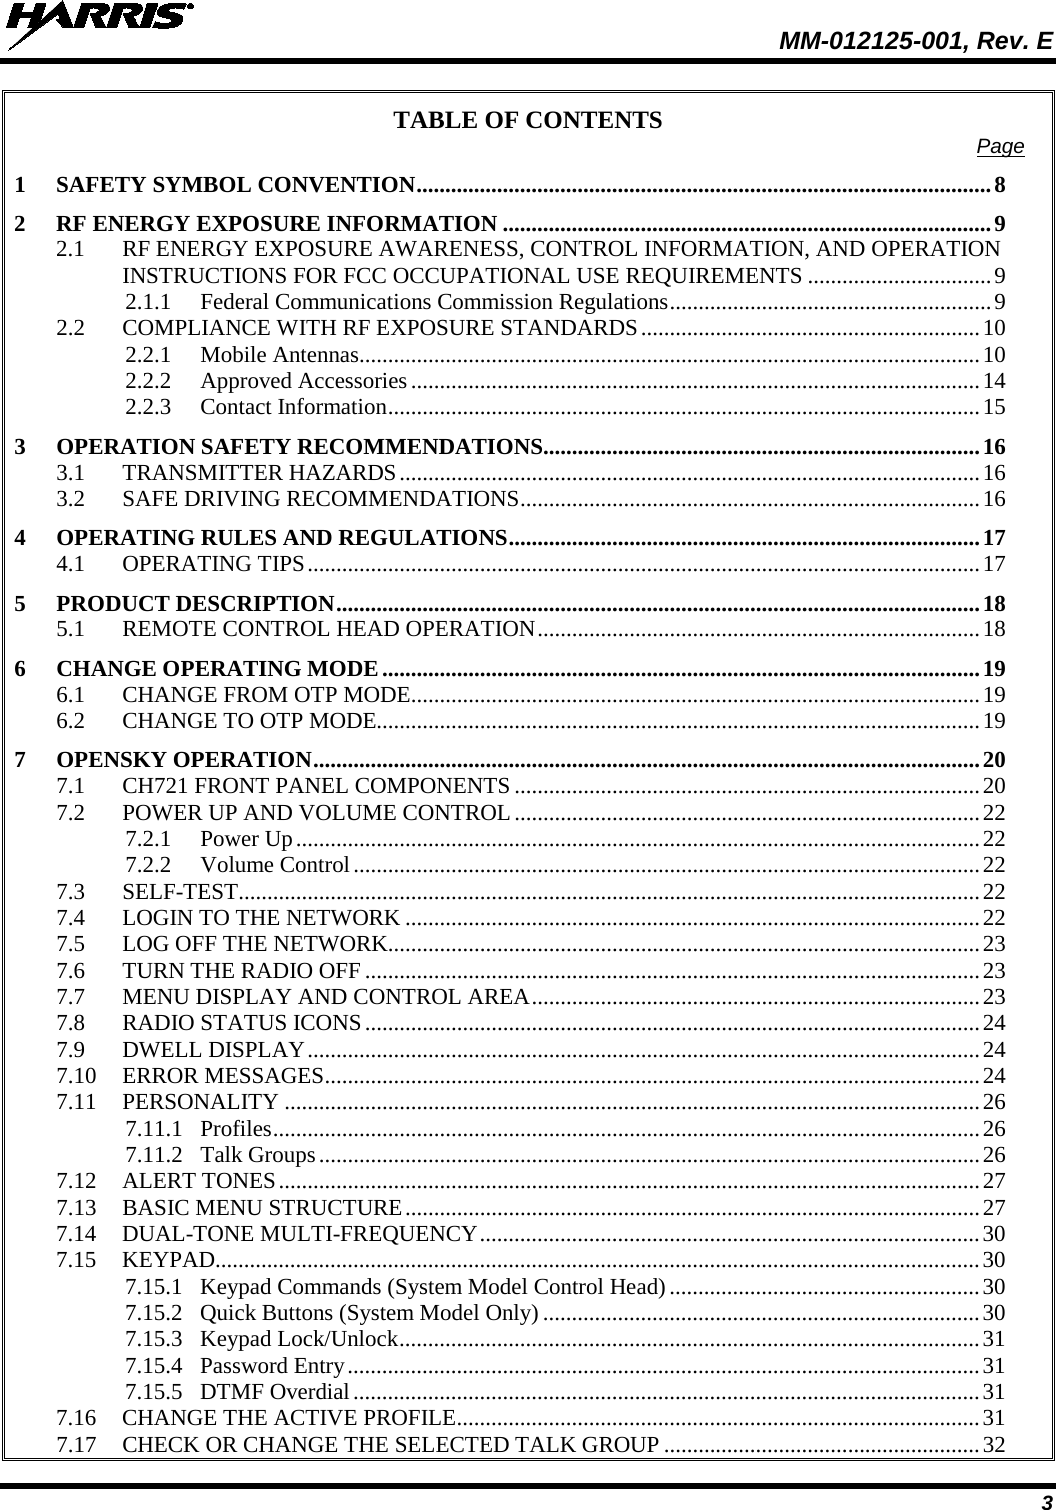  MM-012125-001, Rev. E 3 TABLE OF CONTENTS Page 1 SAFETY SYMBOL CONVENTION .................................................................................................... 8 2 RF ENERGY EXPOSURE INFORMATION ..................................................................................... 9 2.1 RF ENERGY EXPOSURE AWARENESS, CONTROL INFORMATION, AND OPERATION INSTRUCTIONS FOR FCC OCCUPATIONAL USE REQUIREMENTS ................................ 9 2.1.1 Federal Communications Commission Regulations ........................................................ 9 2.2 COMPLIANCE WITH RF EXPOSURE STANDARDS ........................................................... 10 2.2.1 Mobile Antennas ............................................................................................................ 10 2.2.2 Approved Accessories ................................................................................................... 14 2.2.3 Contact Information ....................................................................................................... 15 3 OPERATION SAFETY RECOMMENDATIONS ............................................................................ 16 3.1 TRANSMITTER HAZARDS ..................................................................................................... 16 3.2 SAFE DRIVING RECOMMENDATIONS ................................................................................ 16 4 OPERATING RULES AND REGULATIONS .................................................................................. 17 4.1 OPERATING TIPS ..................................................................................................................... 17 5 PRODUCT DESCRIPTION ................................................................................................................ 18 5.1 REMOTE CONTROL HEAD OPERATION ............................................................................. 18 6 CHANGE OPERATING MODE ........................................................................................................ 19 6.1 CHANGE FROM OTP MODE ................................................................................................... 19 6.2 CHANGE TO OTP MODE......................................................................................................... 19 7 OPENSKY OPERATION .................................................................................................................... 20 7.1 CH721 FRONT PANEL COMPONENTS ................................................................................. 20 7.2 POWER UP AND VOLUME CONTROL ................................................................................. 22 7.2.1 Power Up ....................................................................................................................... 22 7.2.2 Volume Control ............................................................................................................. 22 7.3 SELF-TEST ................................................................................................................................. 22 7.4 LOGIN TO THE NETWORK .................................................................................................... 22 7.5 LOG OFF THE NETWORK....................................................................................................... 23 7.6 TURN THE RADIO OFF ........................................................................................................... 23 7.7 MENU DISPLAY AND CONTROL AREA .............................................................................. 23 7.8 RADIO STATUS ICONS ........................................................................................................... 24 7.9 DWELL DISPLAY ..................................................................................................................... 24 7.10 ERROR MESSAGES .................................................................................................................. 24 7.11 PERSONALITY ......................................................................................................................... 26 7.11.1 Profiles ........................................................................................................................... 26 7.11.2 Talk Groups ................................................................................................................... 26 7.12 ALERT TONES .......................................................................................................................... 27 7.13 BASIC MENU STRUCTURE .................................................................................................... 27 7.14 DUAL-TONE MULTI-FREQUENCY ....................................................................................... 30 7.15 KEYPAD..................................................................................................................................... 30 7.15.1 Keypad Commands (System Model Control Head) ...................................................... 30 7.15.2 Quick Buttons (System Model Only) ............................................................................ 30 7.15.3 Keypad Lock/Unlock ..................................................................................................... 31 7.15.4 Password Entry .............................................................................................................. 31 7.15.5 DTMF Overdial ............................................................................................................. 31 7.16 CHANGE THE ACTIVE PROFILE ........................................................................................... 31 7.17 CHECK OR CHANGE THE SELECTED TALK GROUP ....................................................... 32 